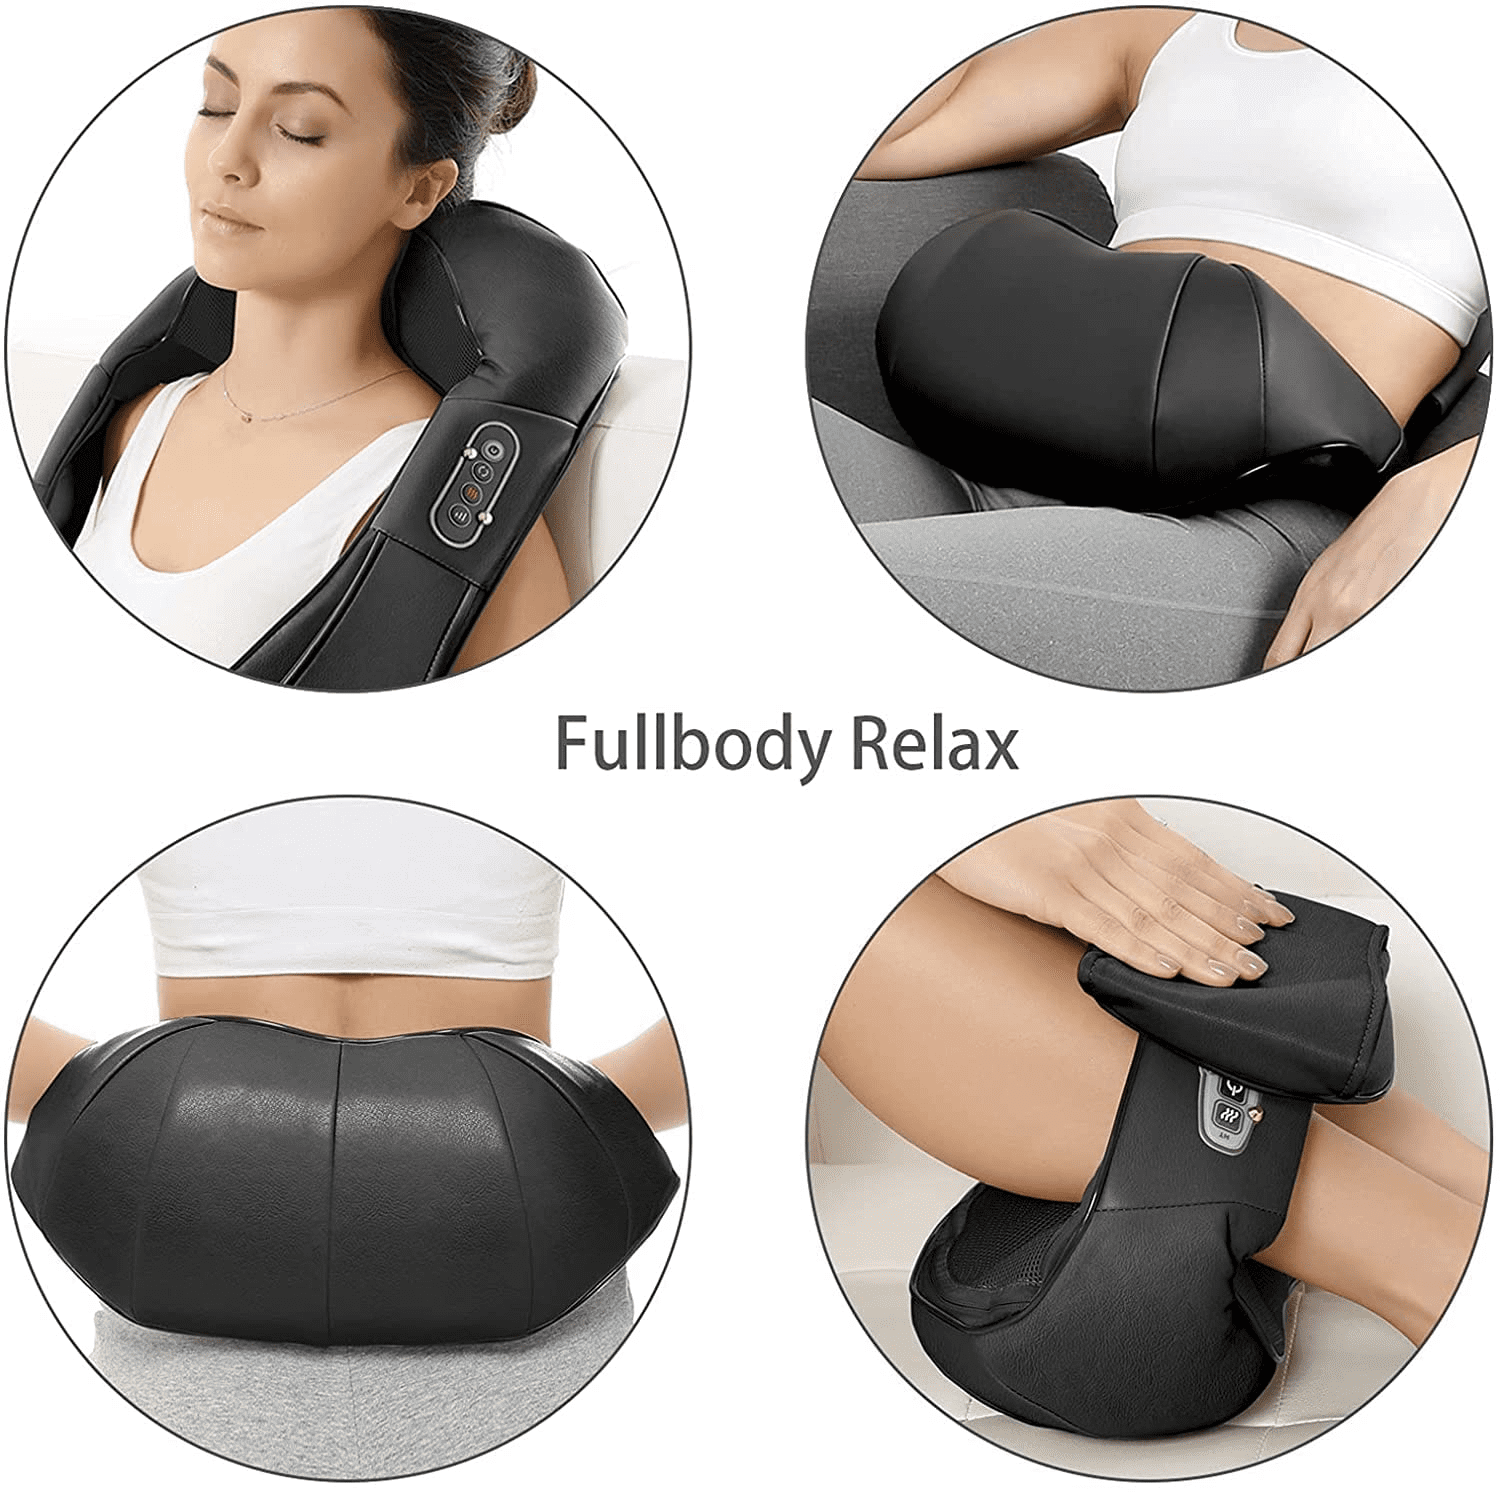 bwoopop Neck Massager, Shiatsu Electric Back Shoulder and Neck Massage with  Heat - Kneading Massage …See more bwoopop Neck Massager, Shiatsu Electric